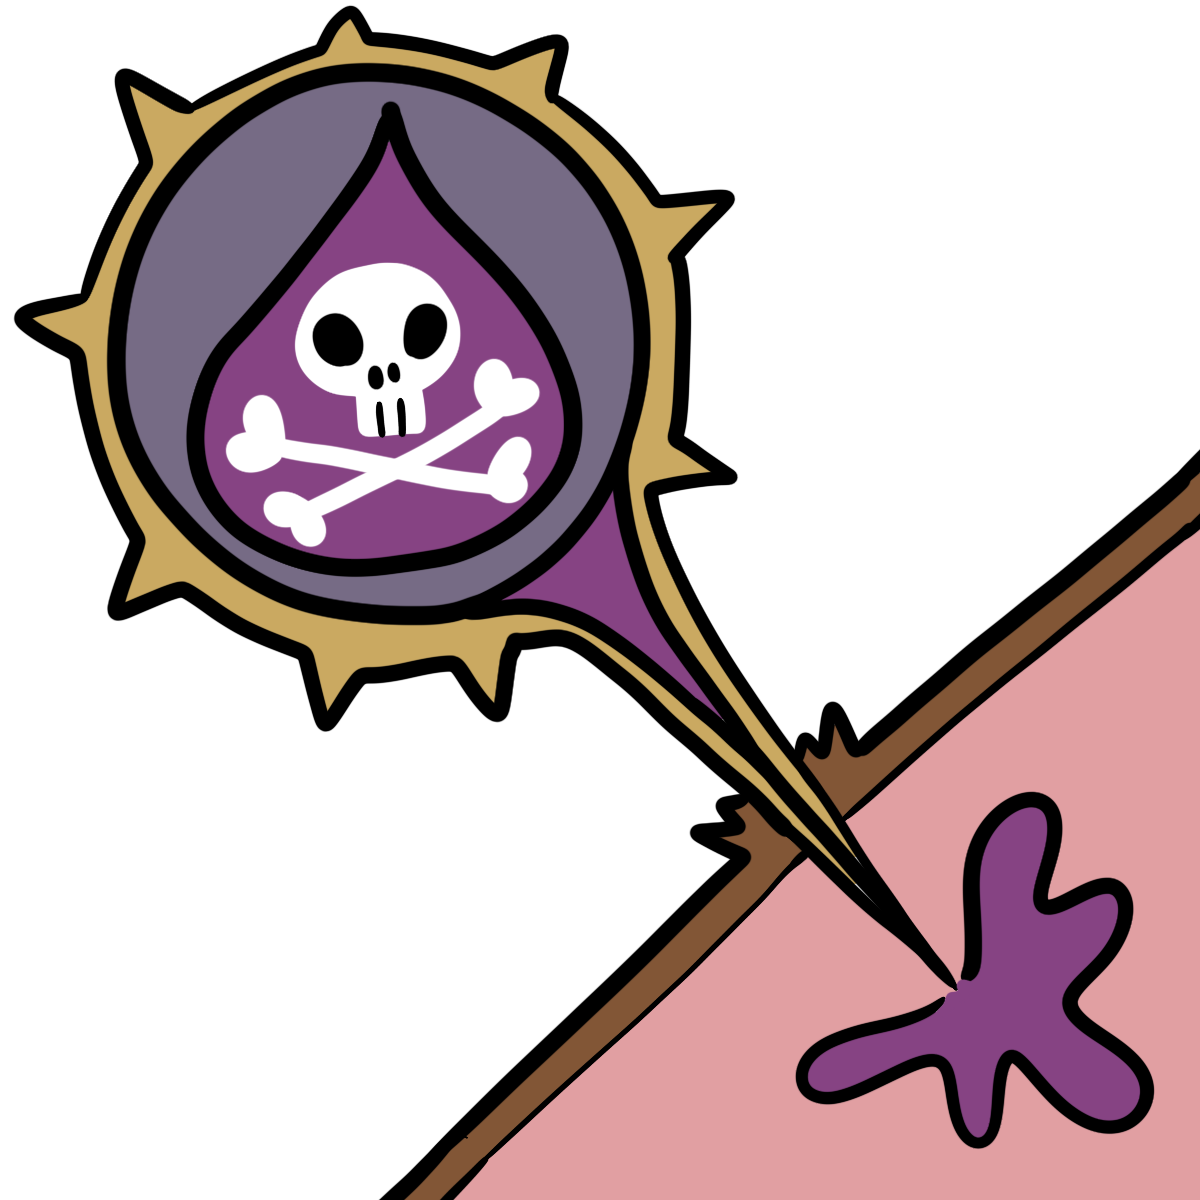 a spiky purple blob containing a bright purple droplet with skull and crossbones injects purple liquid through a spiky tooth- or stinger-like protrusion into pink in the corner through brown layer. Purple liquid blobs out into the pink at the end of the spike.